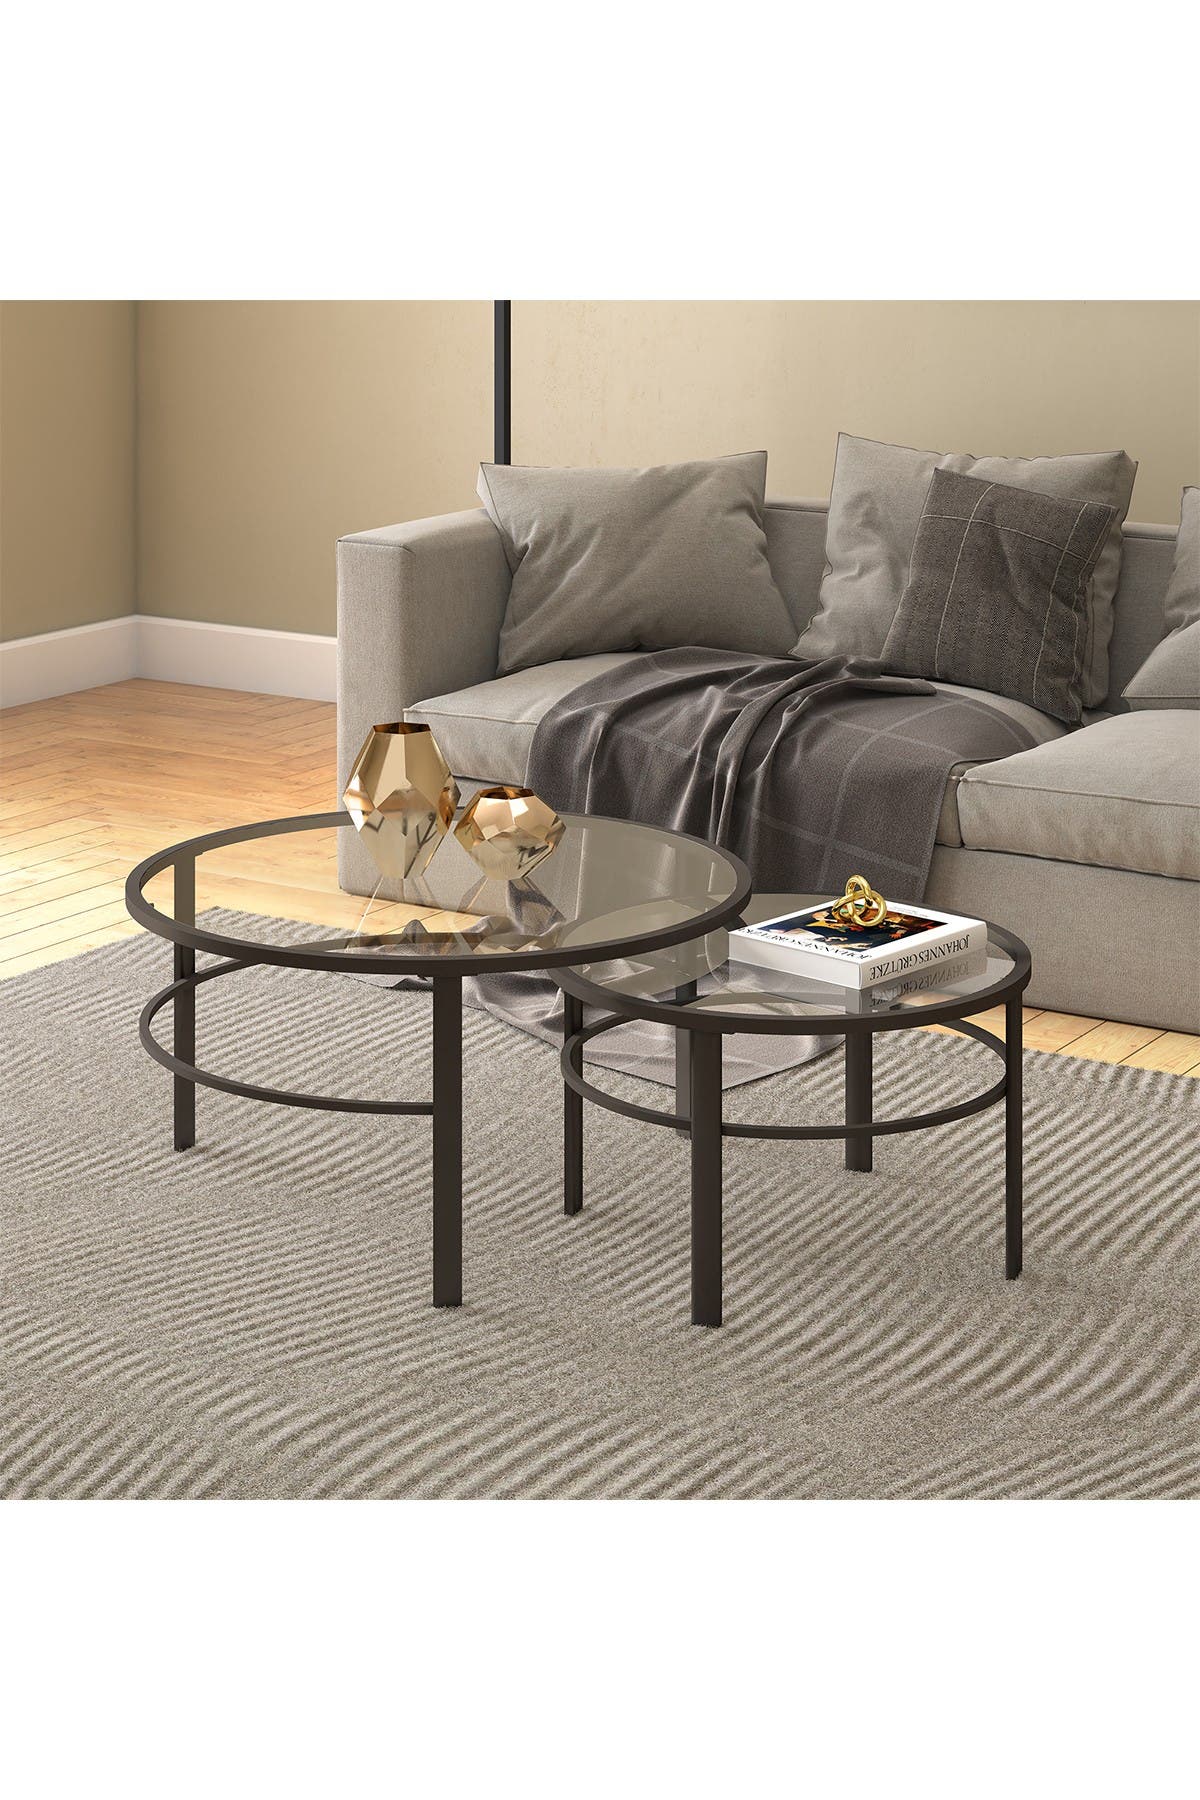 Addison And Lane Gaia Blackened Bronze Nesting Coffee Table Set In Rust/copper1